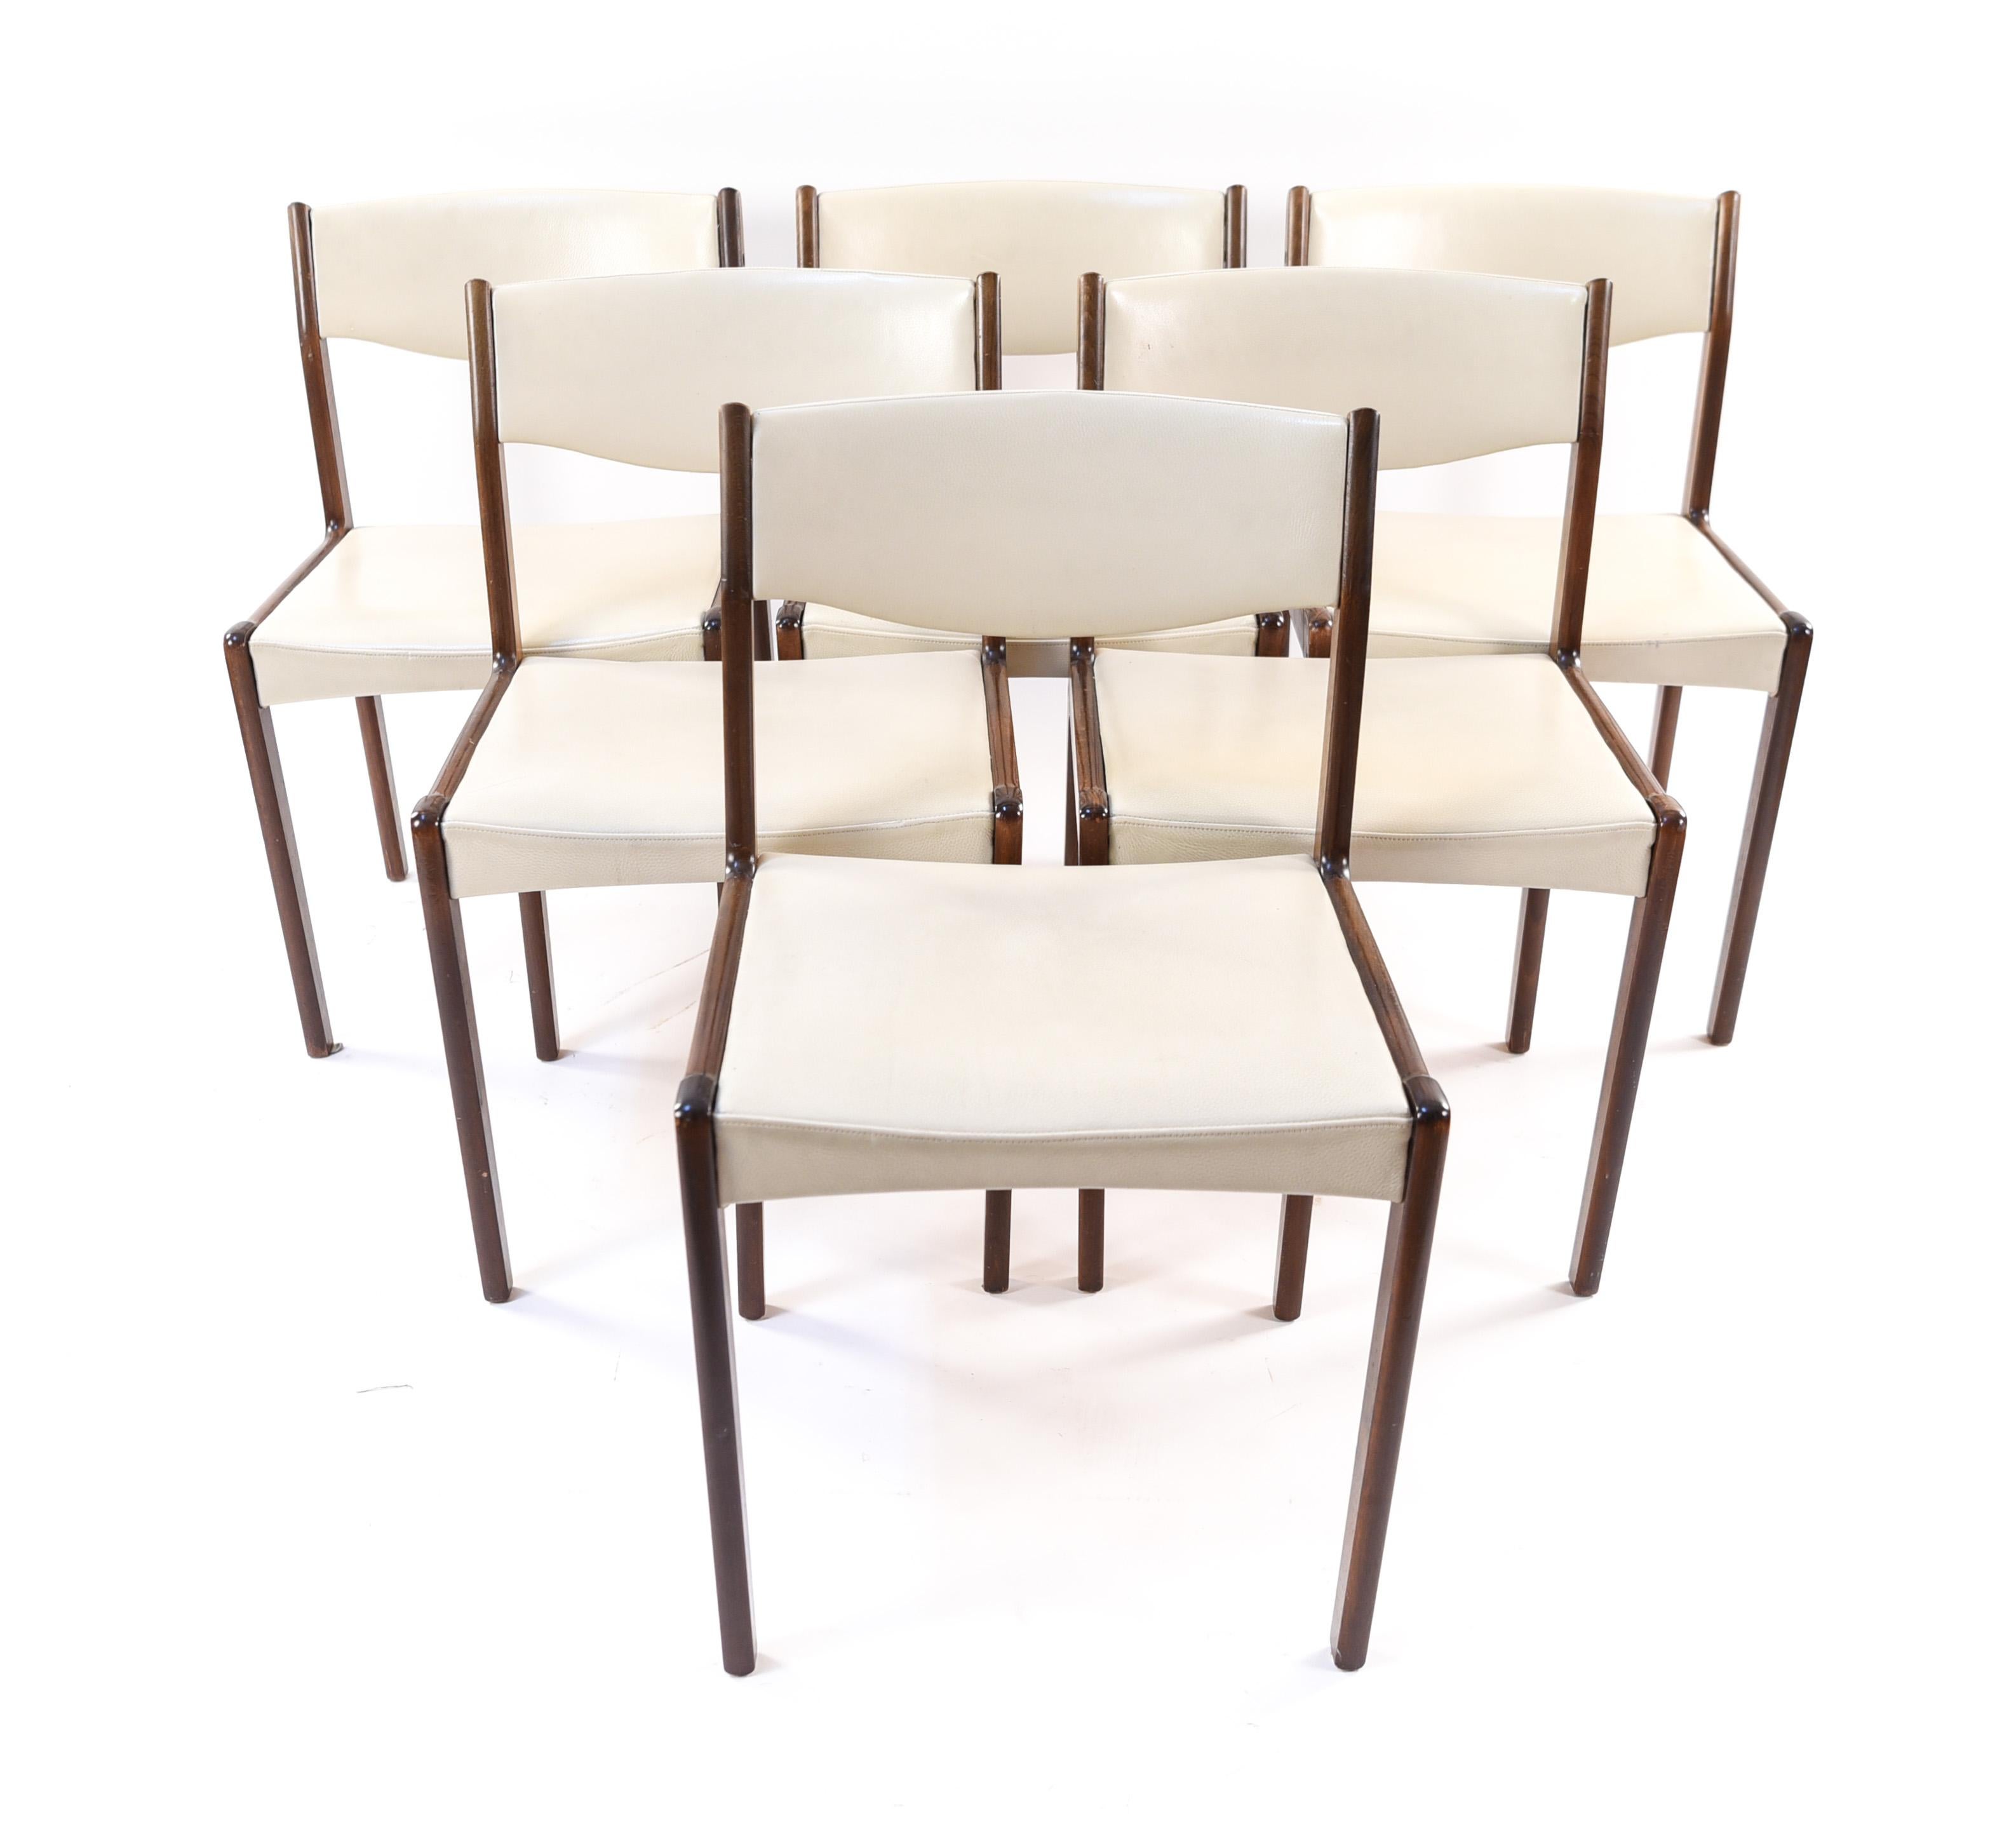 This is a wonderful set of six Danish midcentury dining or side chairs by Sax, circa 1960s. These chairs have a timeless modern design, with rosewood frames and white leather upholstery. Their sleek appearance serves them well to fit around a dining